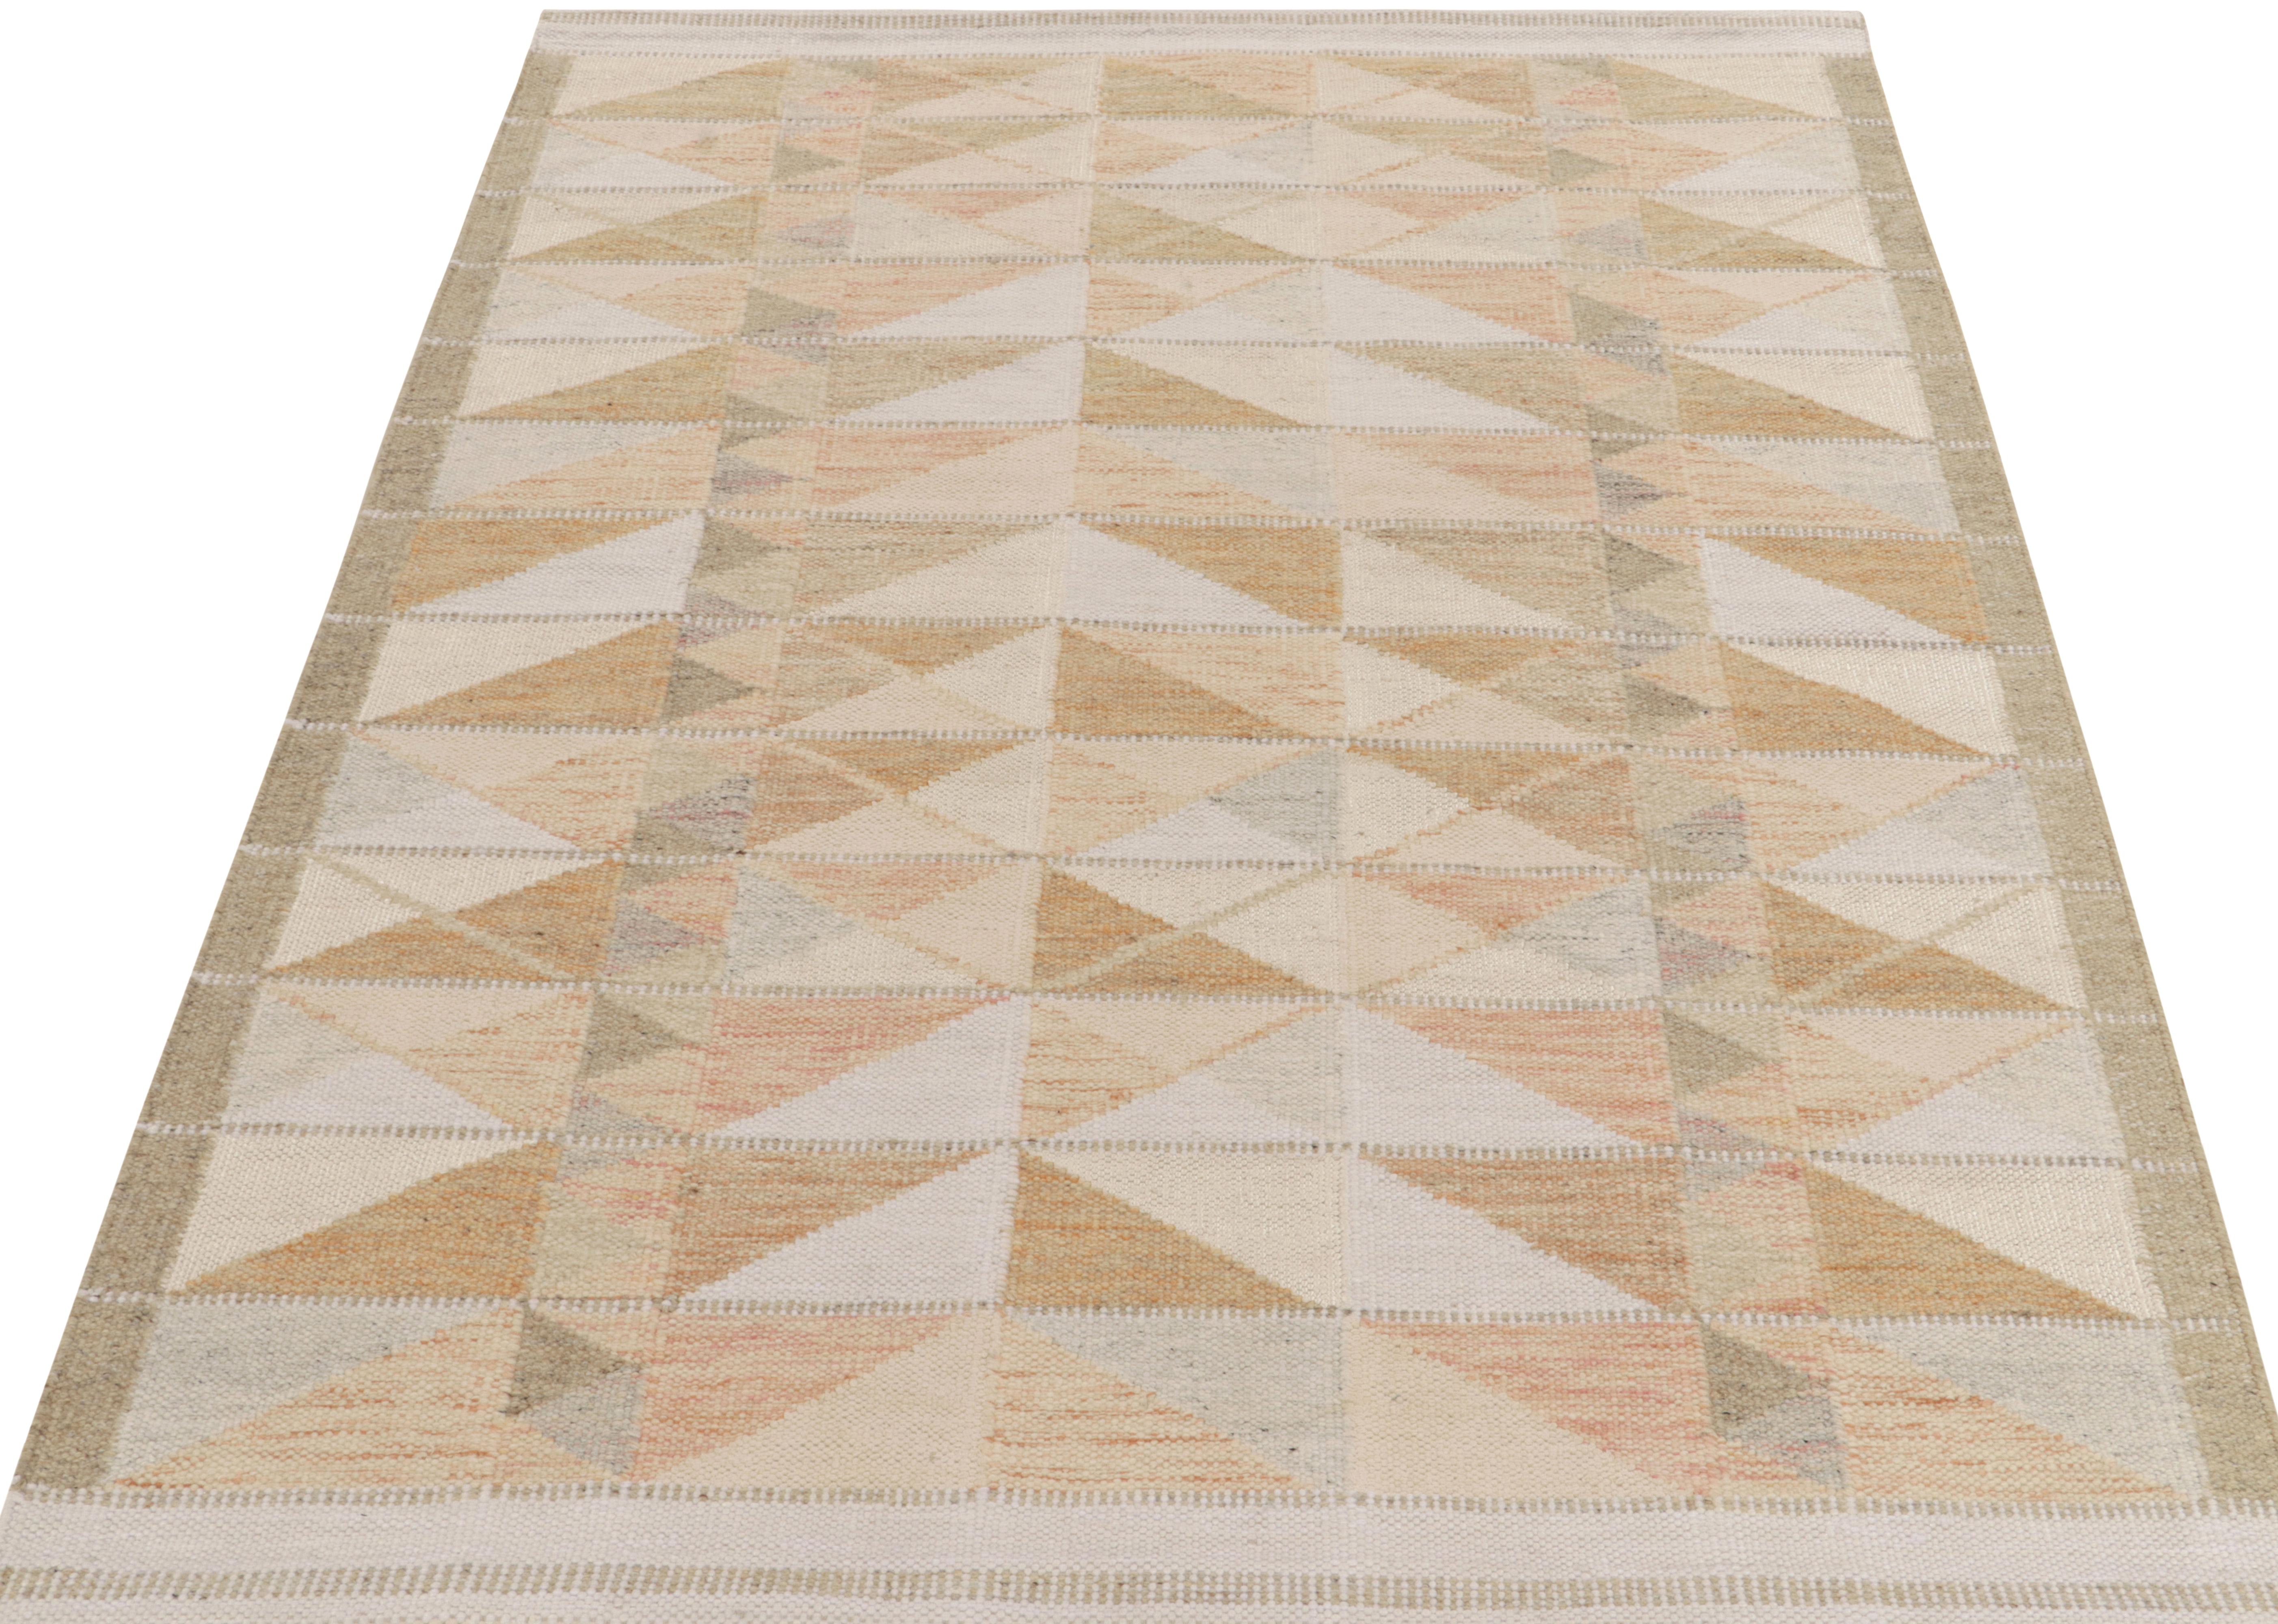 Rug & Kilim’s custom Scandinavian style kilim design, from our celebrated flat weave texture of the titular award-winning collection. Exemplified in this 6 x 8 scale, the design enjoys the finesse of Swedish aesthetics with a dextrous geometric